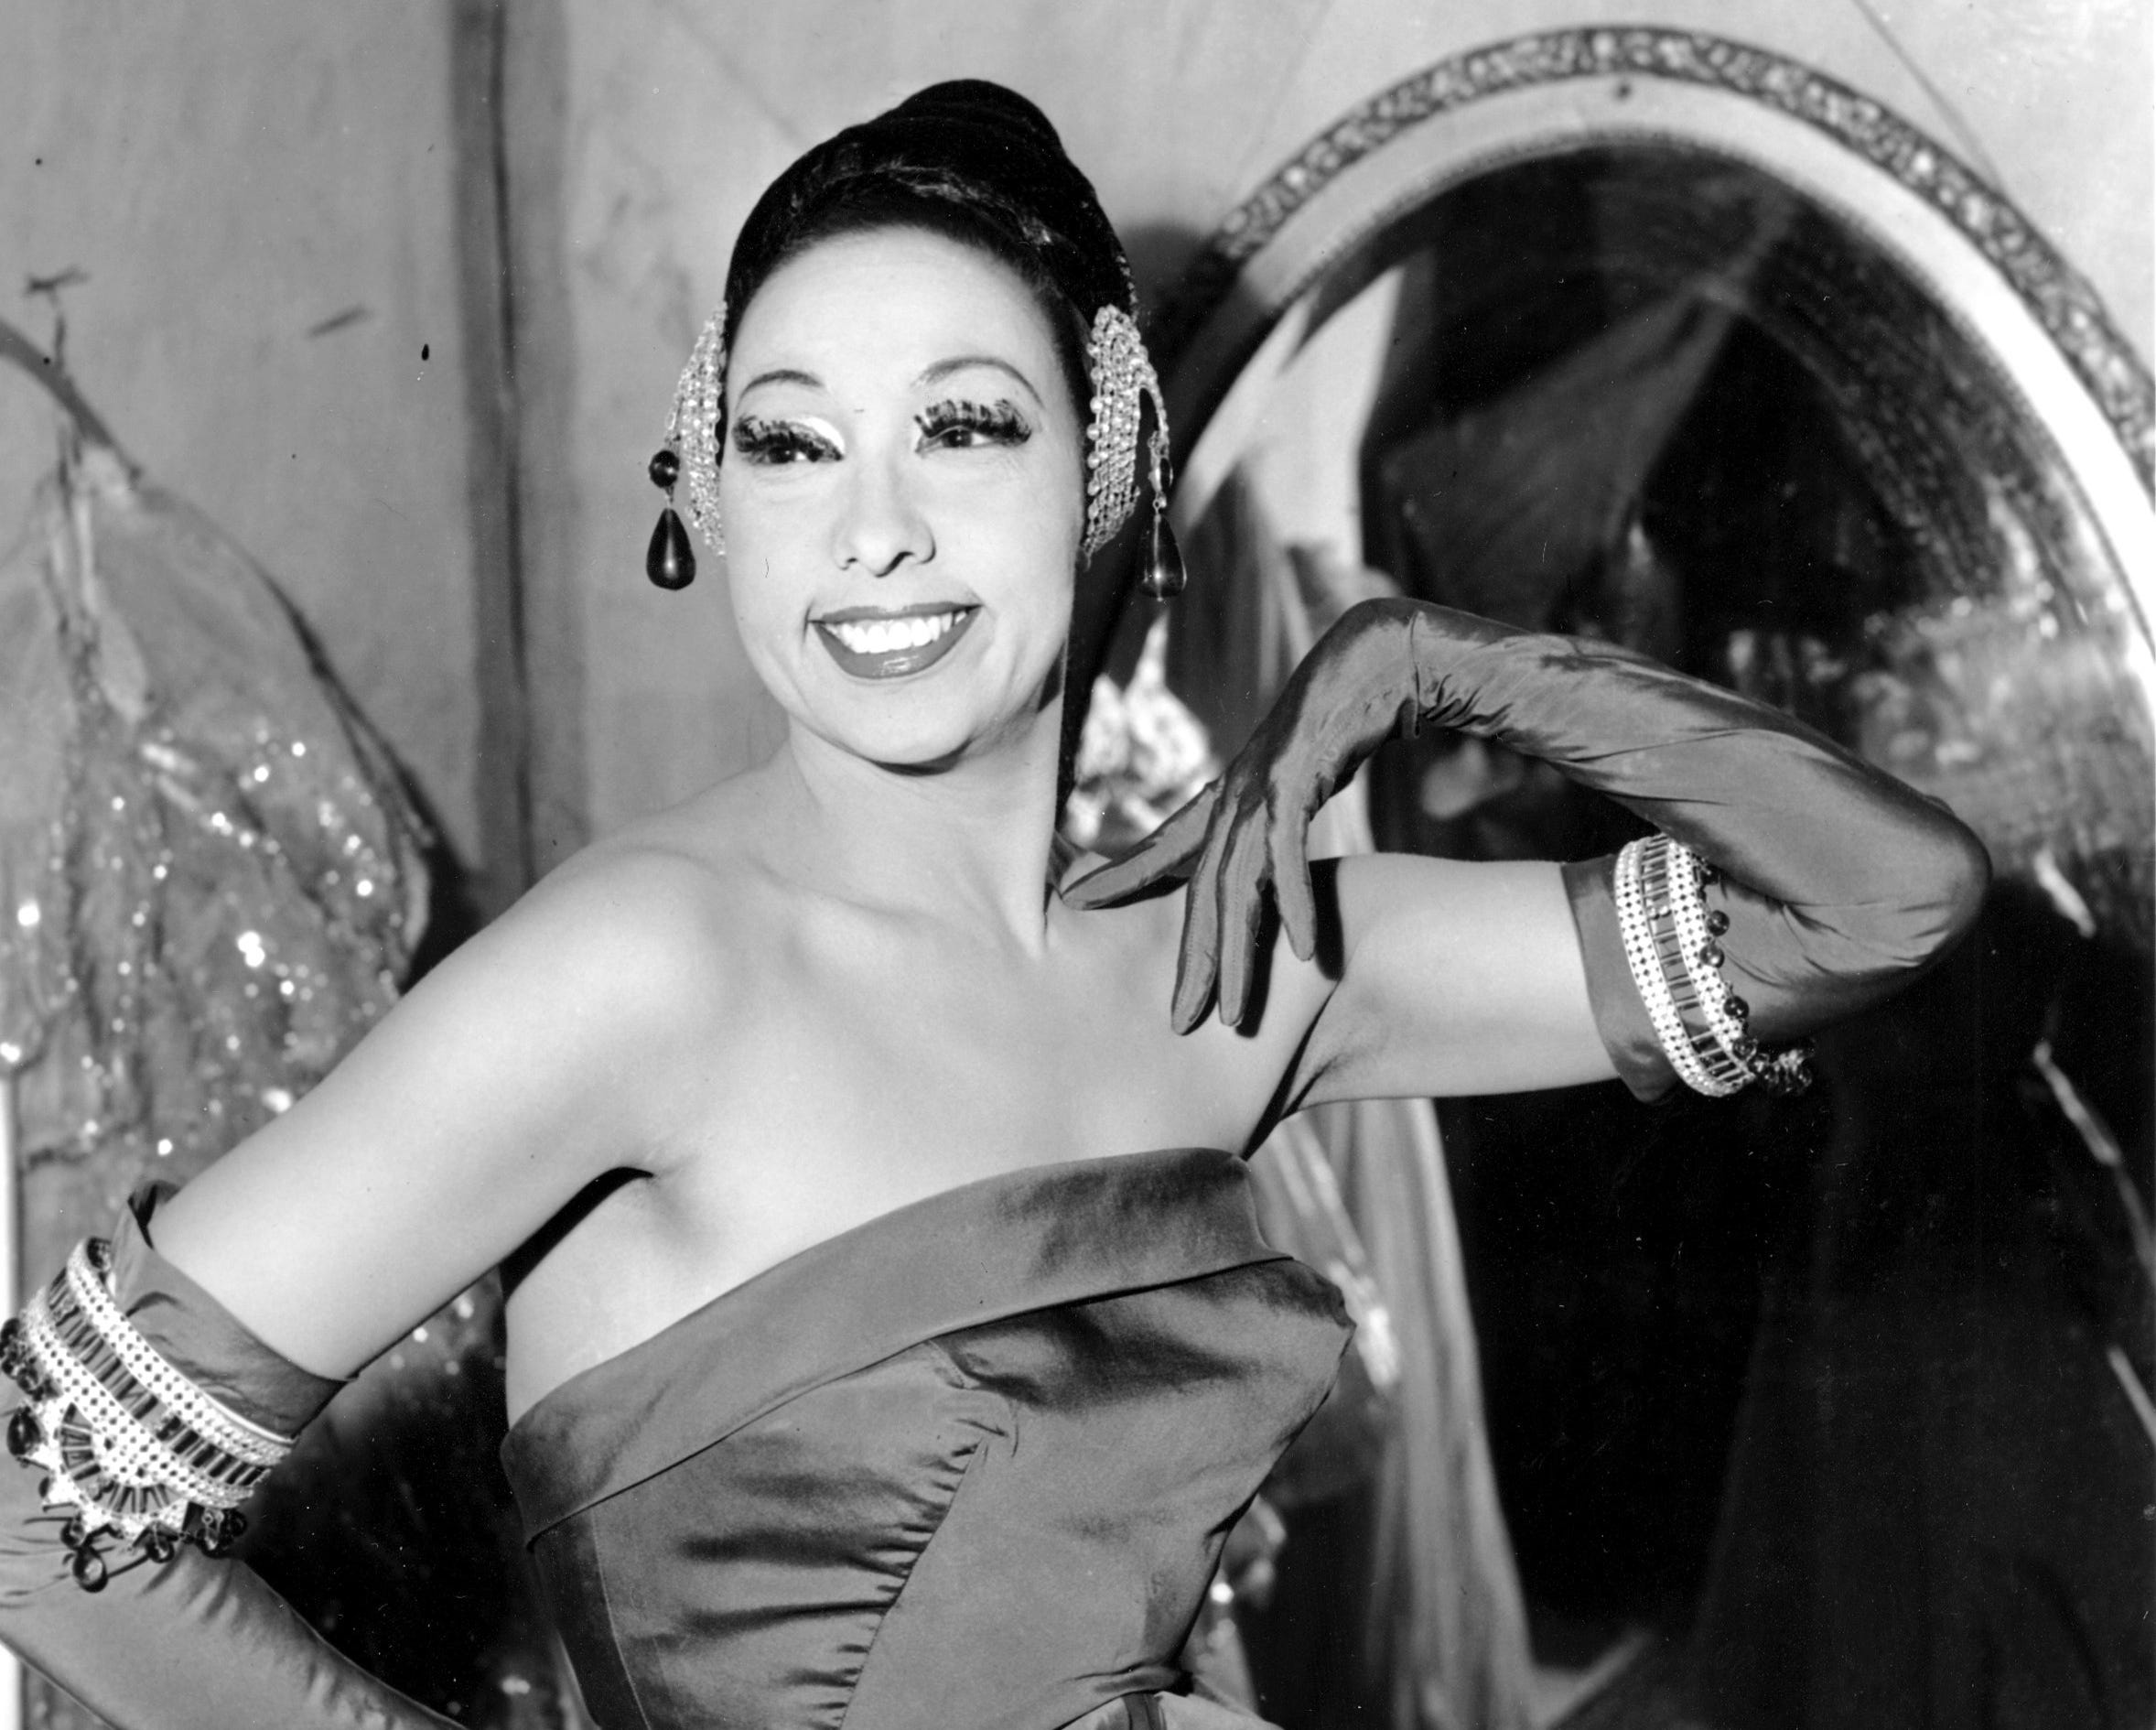 Josephine Baker becomes first Black woman honored at Paris' Pantheon in 'historic' moment